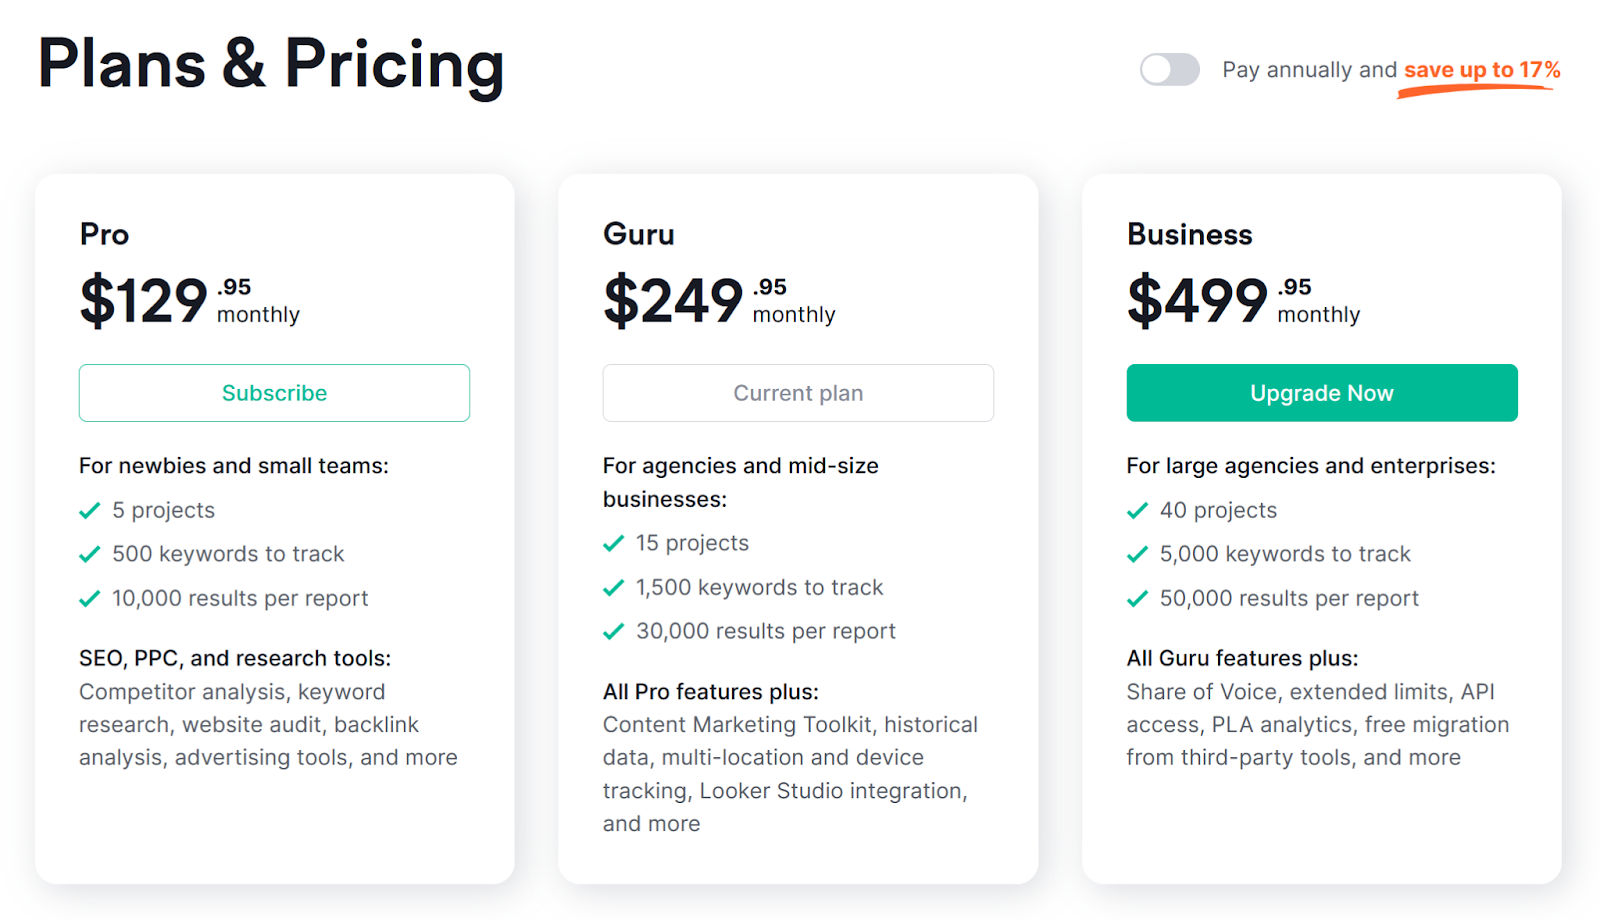 Semrush's Plans & Pricing page